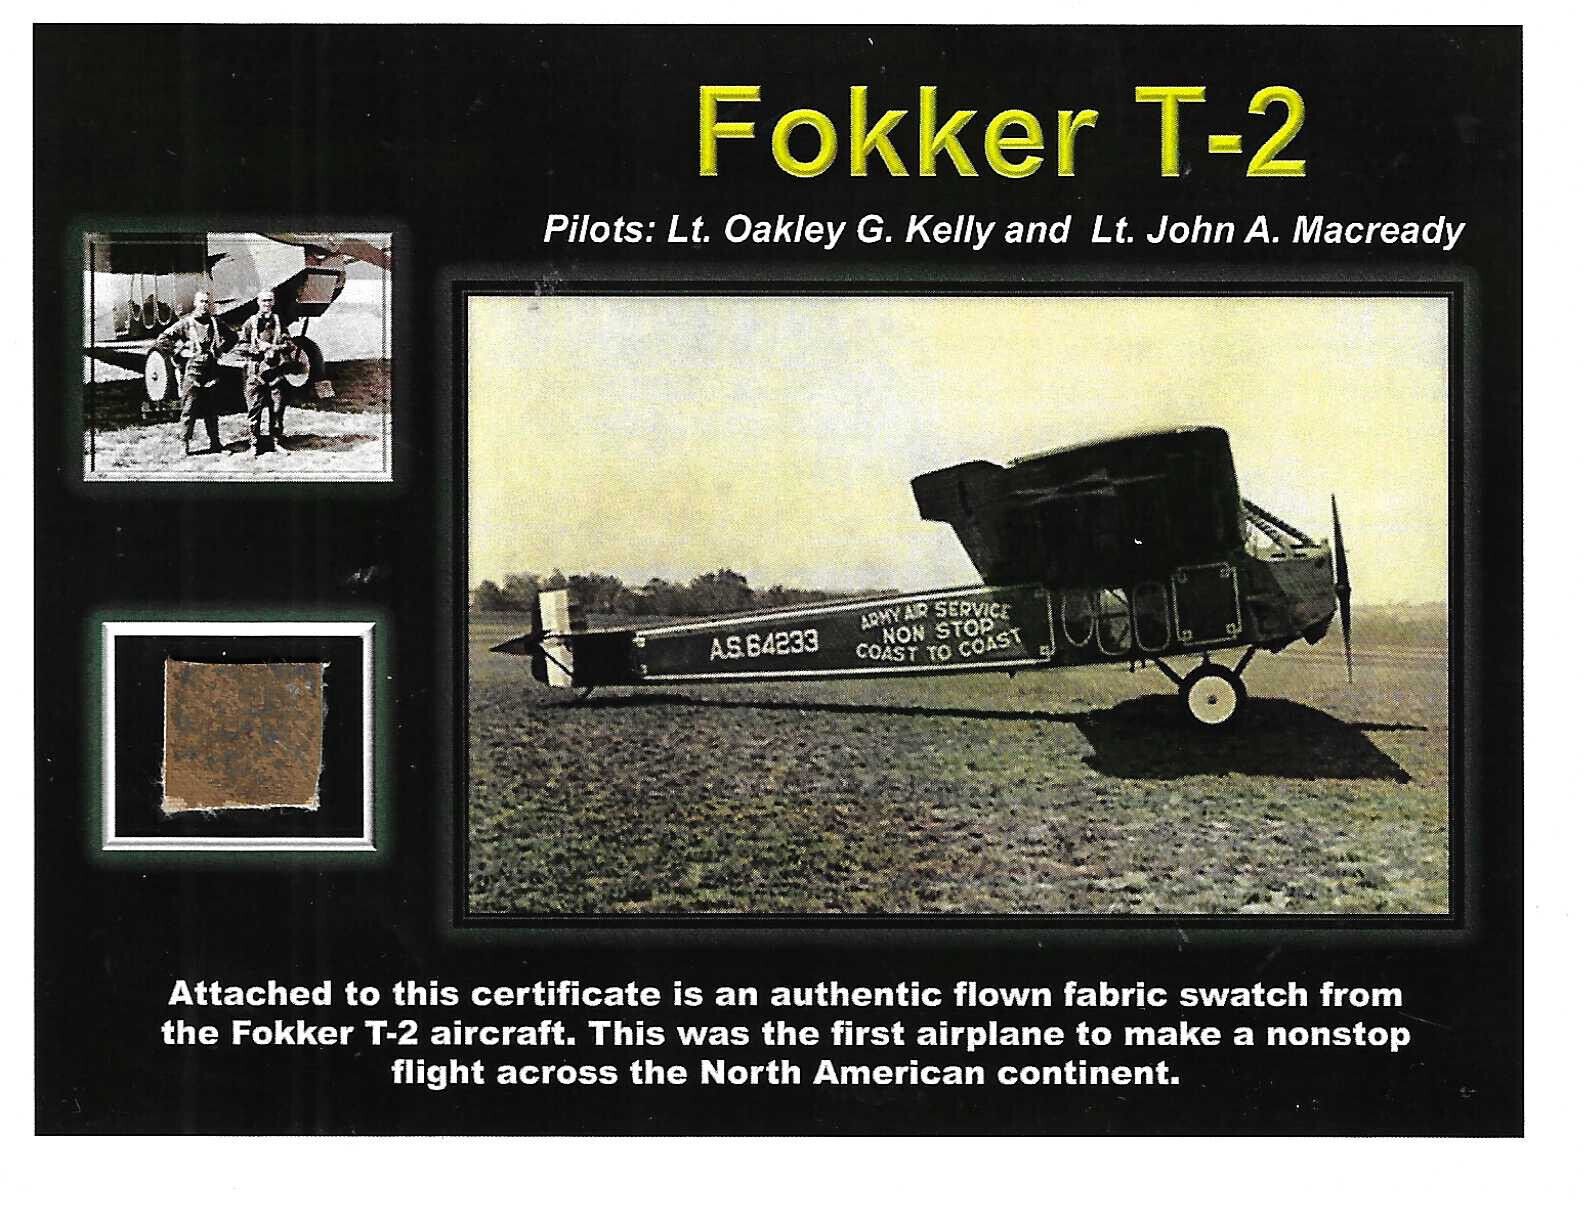 Fokker T-2 Authentic Flown Fabric swatch on a Beautiful Certificate